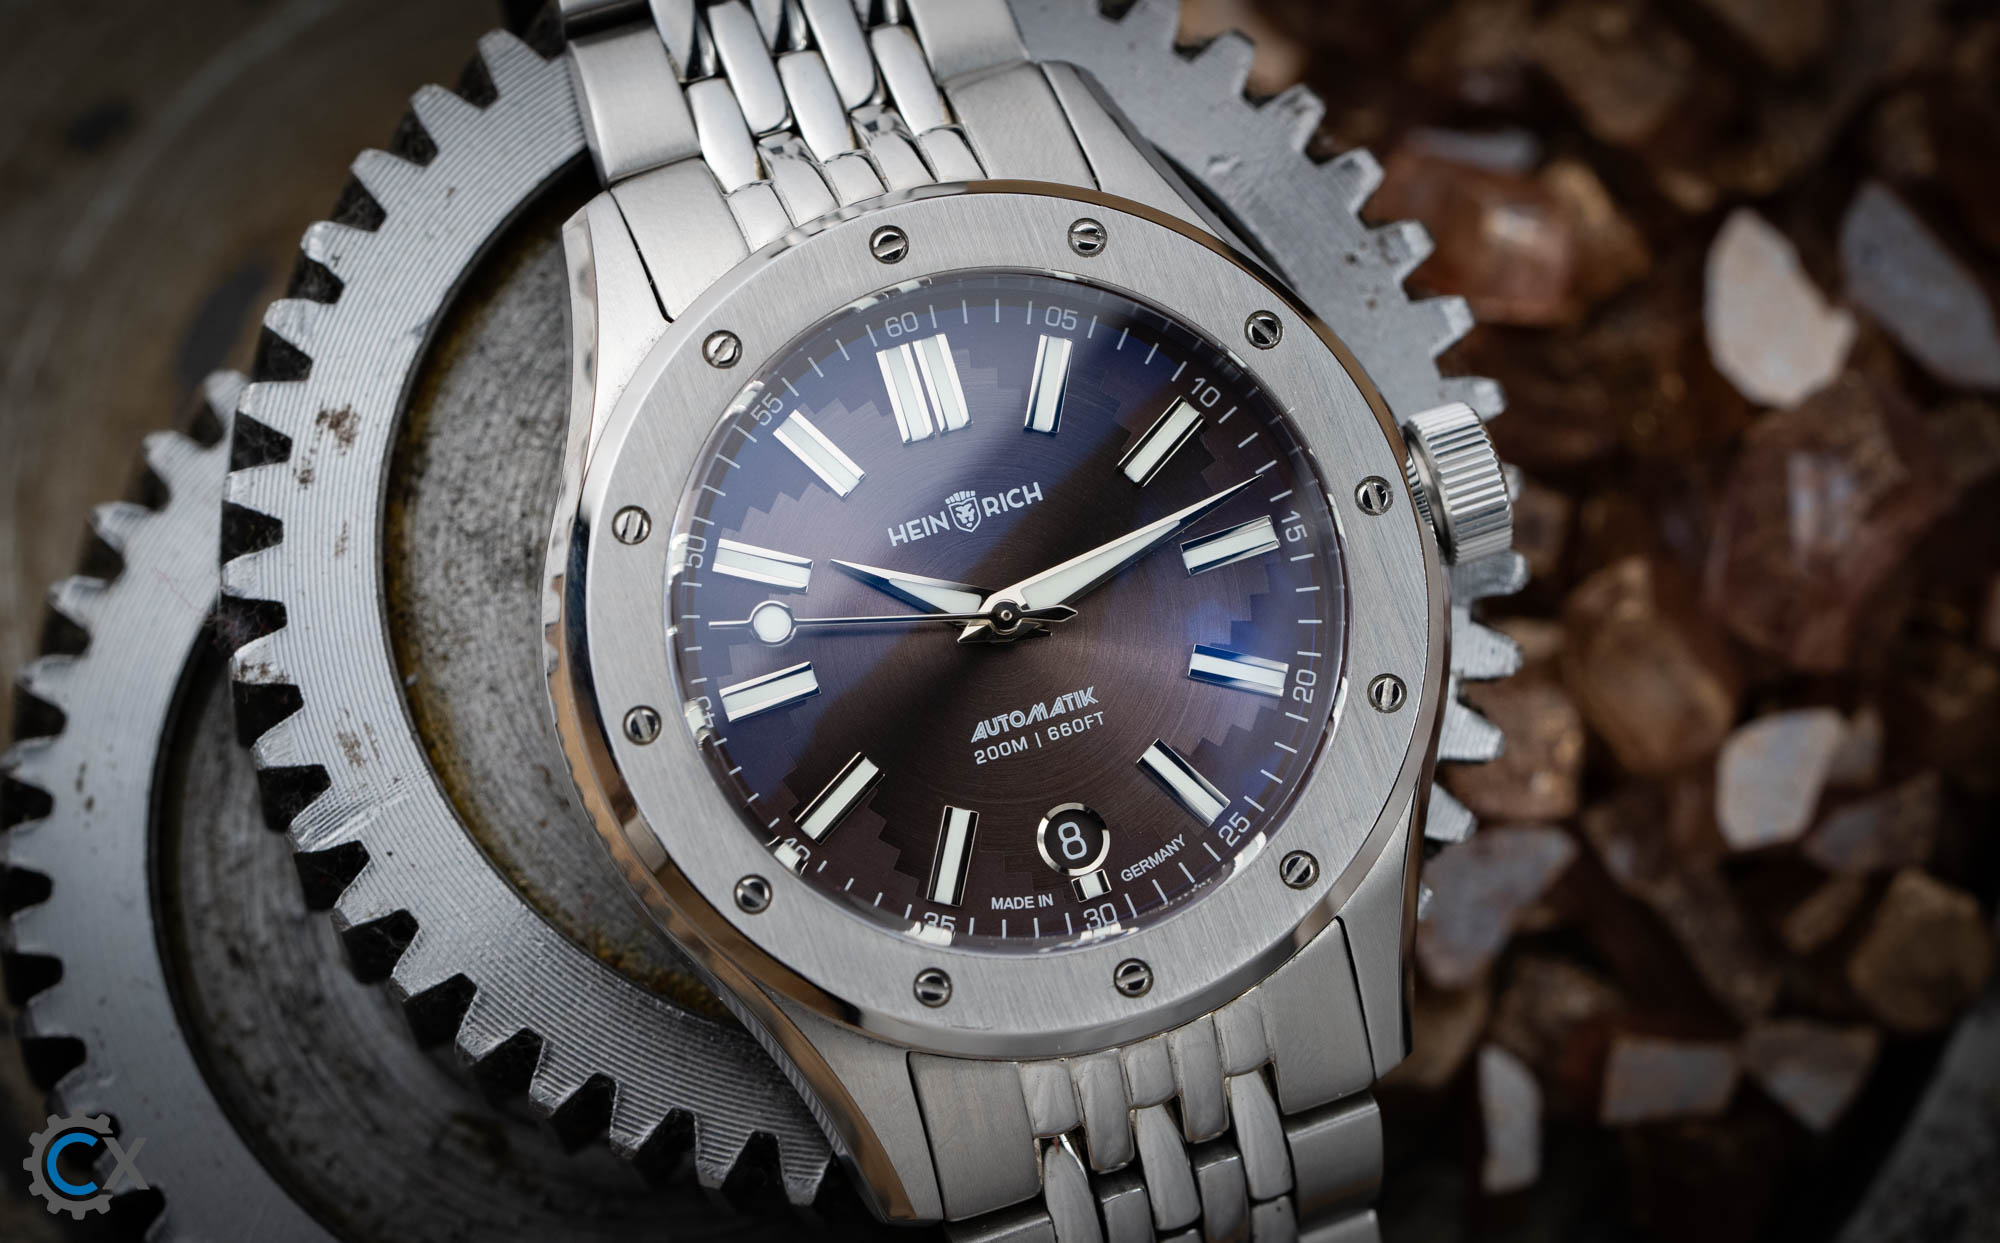 Heinrich Watch Helicoprion Buzzsaw Dial Test 2023 01349